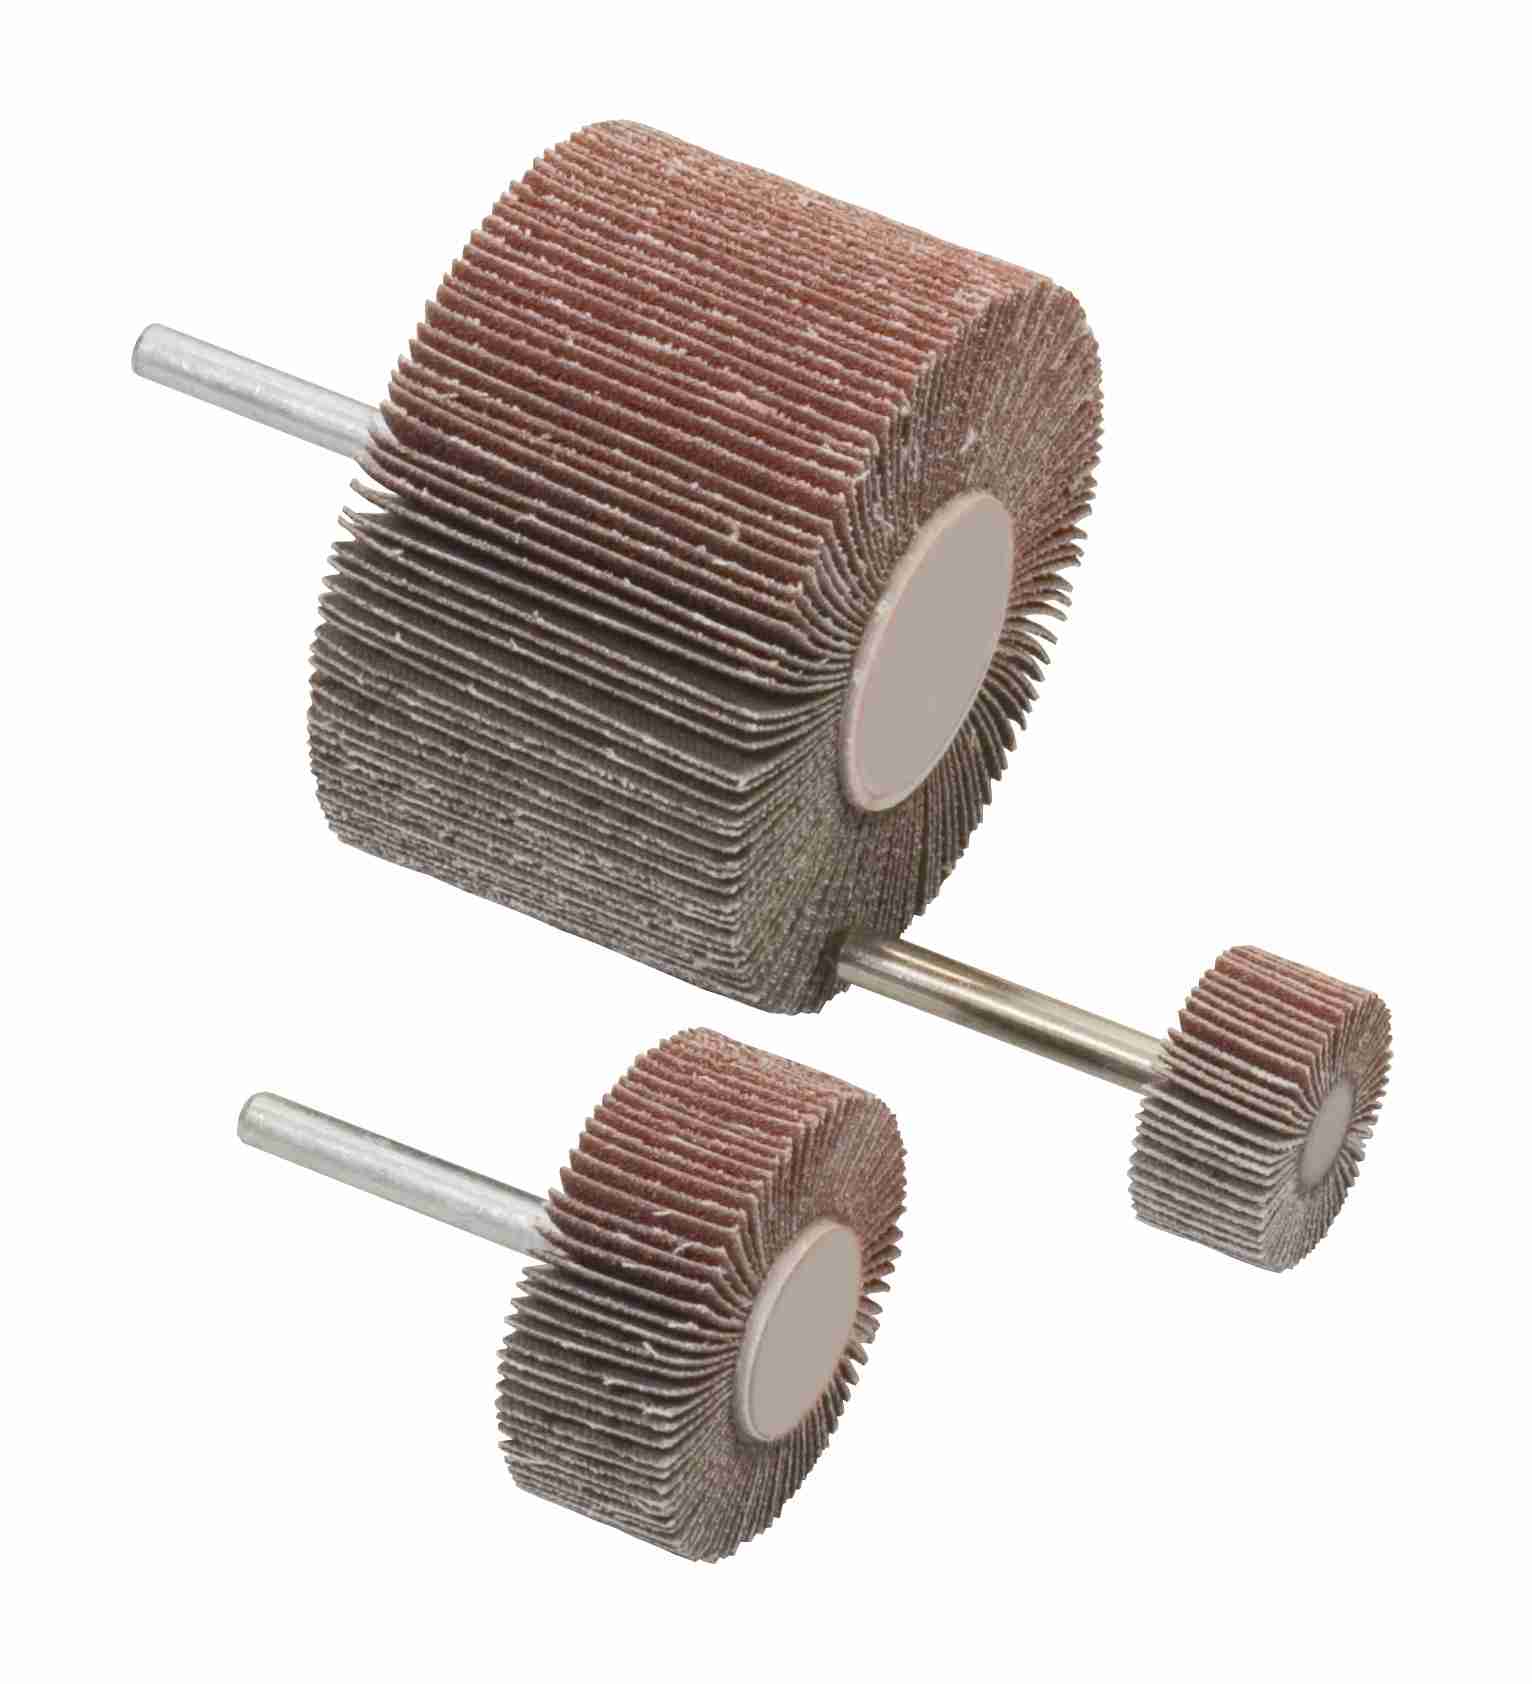 Abrasive Cloth Flap Wheels on a Spindle